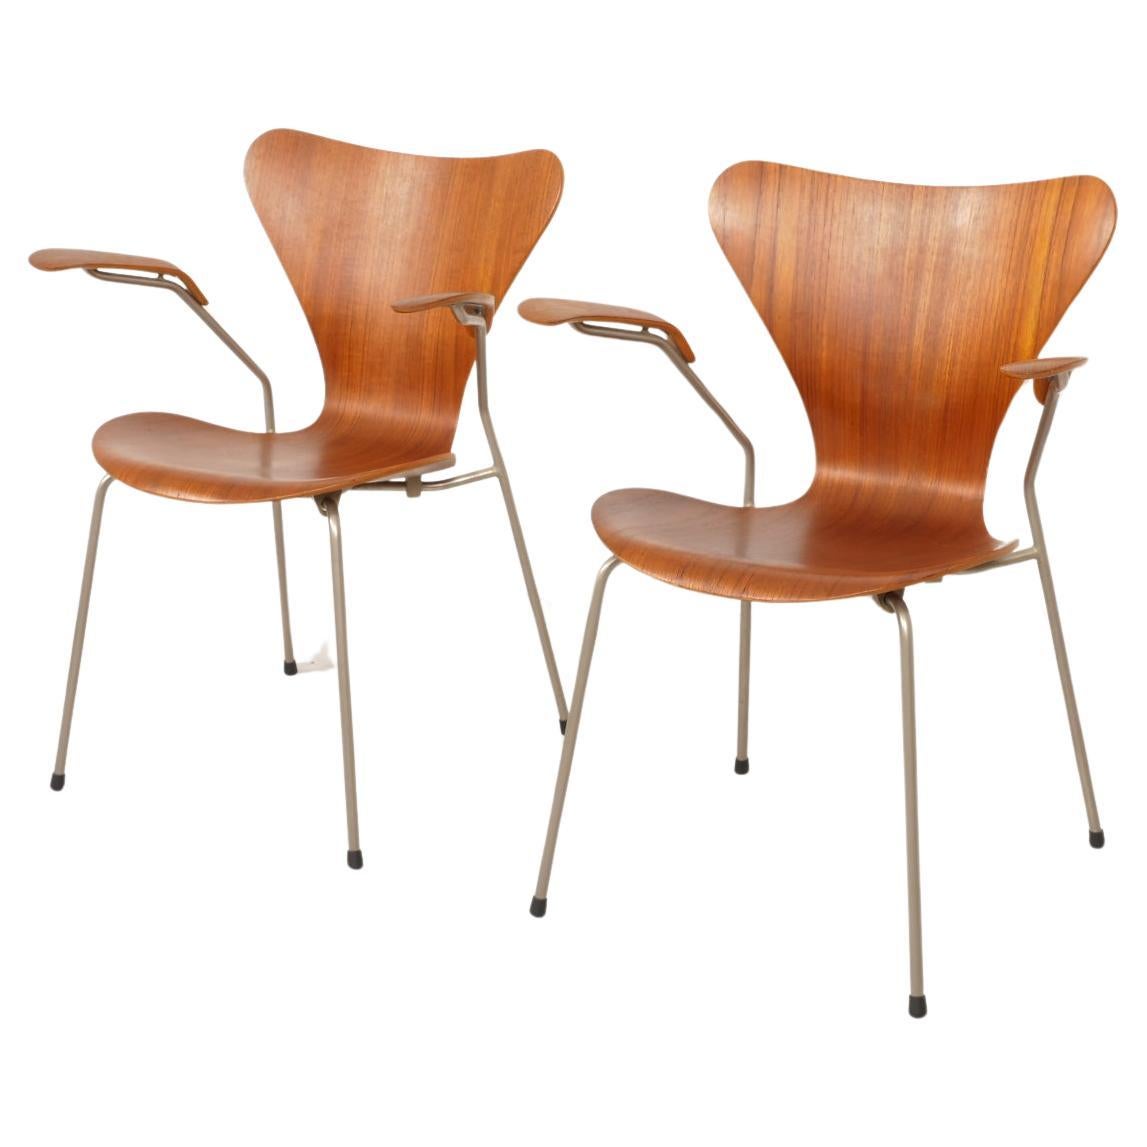 2 Vintage butterfly chairs with armrests by Arne Jacobsen model 3207 Teak For Sale